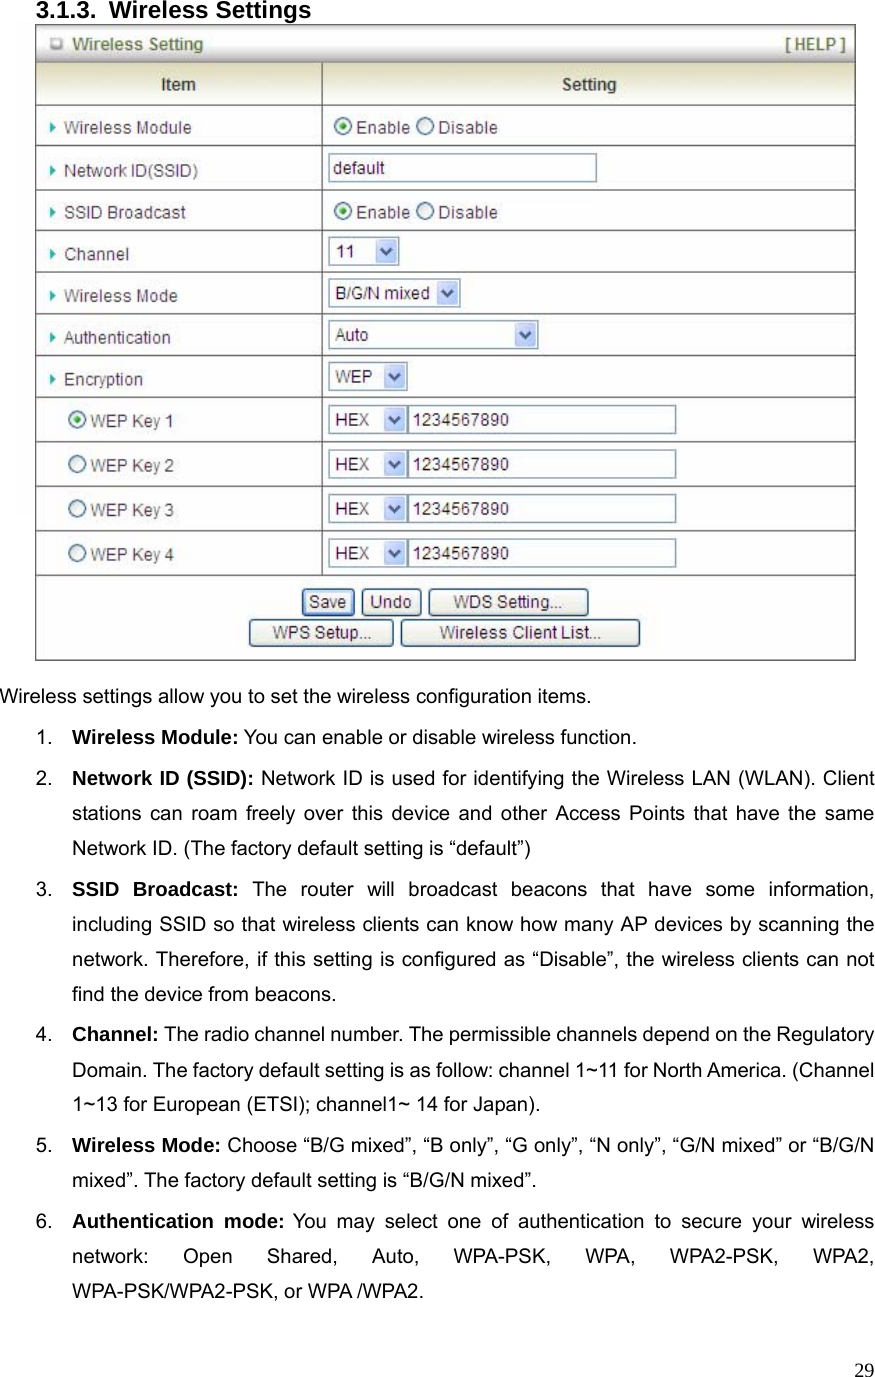  293.1.3. Wireless Settings   Wireless settings allow you to set the wireless configuration items. 1.  Wireless Module: You can enable or disable wireless function. 2.  Network ID (SSID): Network ID is used for identifying the Wireless LAN (WLAN). Client stations can roam freely over this device and other Access Points that have the same Network ID. (The factory default setting is “default”) 3.  SSID Broadcast: The router will broadcast beacons that have some information, including SSID so that wireless clients can know how many AP devices by scanning the network. Therefore, if this setting is configured as “Disable”, the wireless clients can not find the device from beacons. 4.  Channel: The radio channel number. The permissible channels depend on the Regulatory Domain. The factory default setting is as follow: channel 1~11 for North America. (Channel 1~13 for European (ETSI); channel1~ 14 for Japan). 5.  Wireless Mode: Choose “B/G mixed”, “B only”, “G only”, “N only”, “G/N mixed” or “B/G/N mixed”. The factory default setting is “B/G/N mixed”. 6.  Authentication mode: You may select one of authentication to secure your wireless network: Open Shared, Auto, WPA-PSK, WPA, WPA2-PSK, WPA2, WPA-PSK/WPA2-PSK, or WPA /WPA2. 